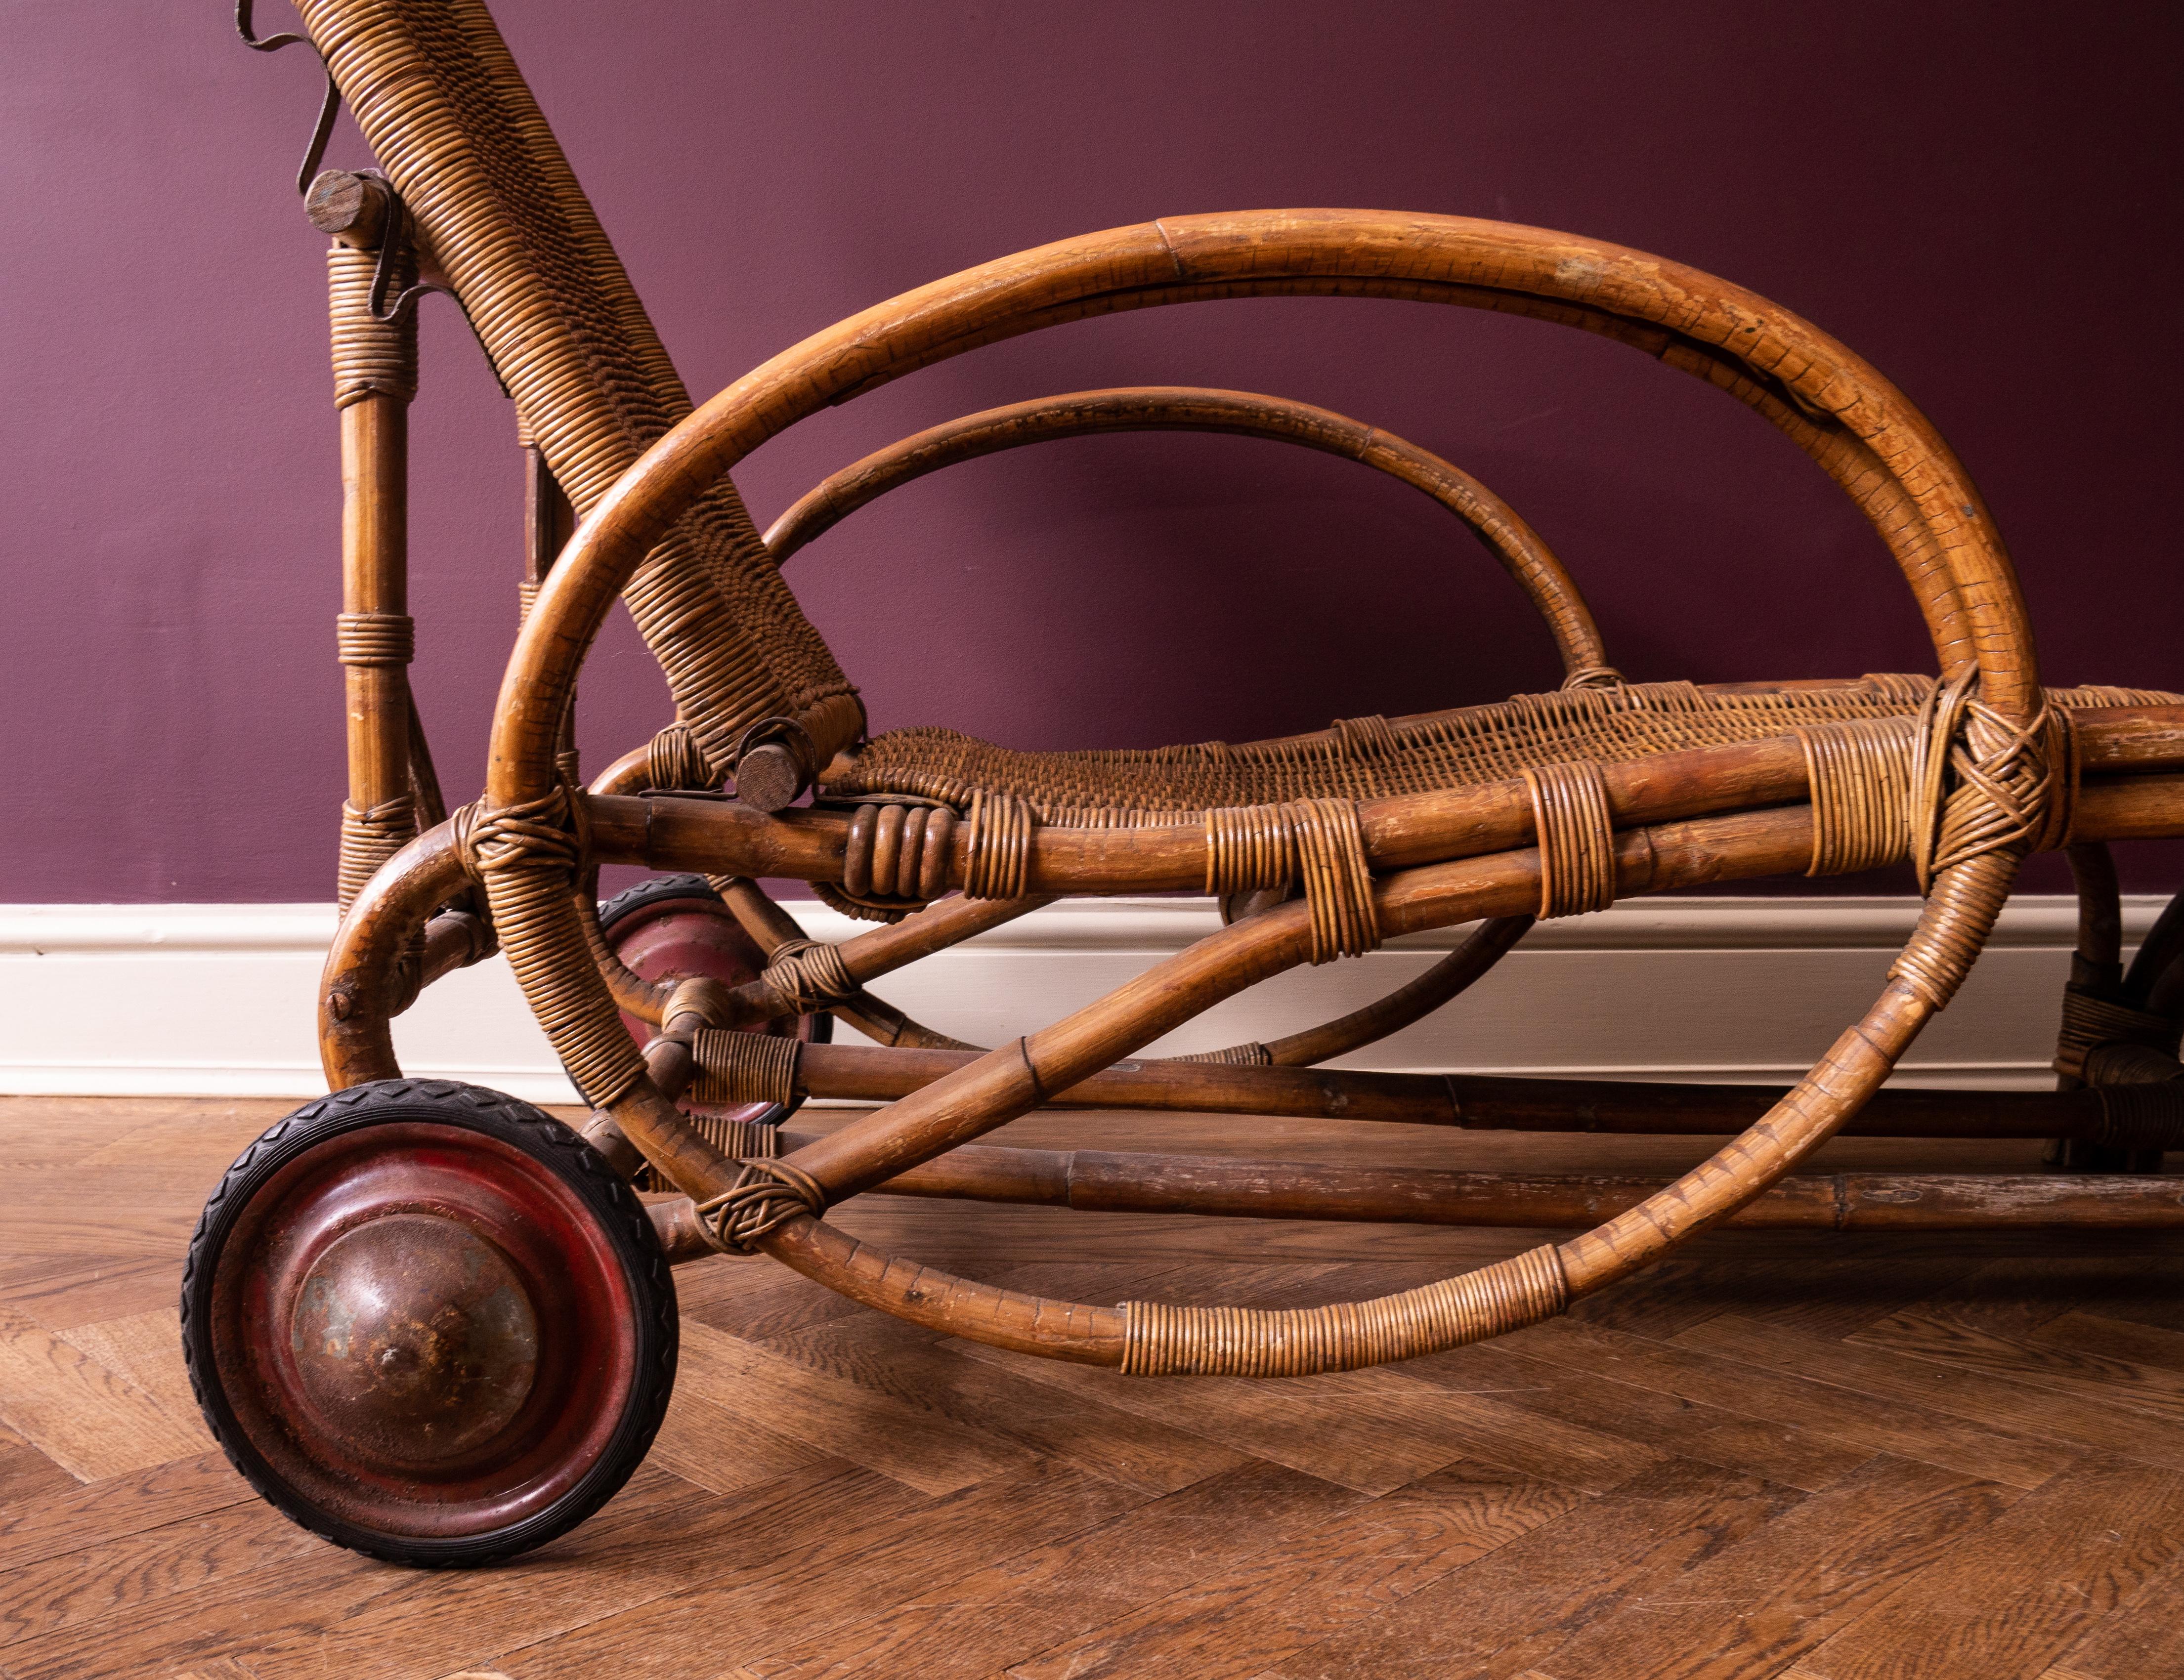 Definitive Bauhaus elegance - an iconic and rare collector piece in excellent original condition. Bentwood, woven cane, red enameled steel and rubber wheels.

Attributed to Erich Dieckmann
When the Bauhaus school moved to Dessau in 1925, Erich